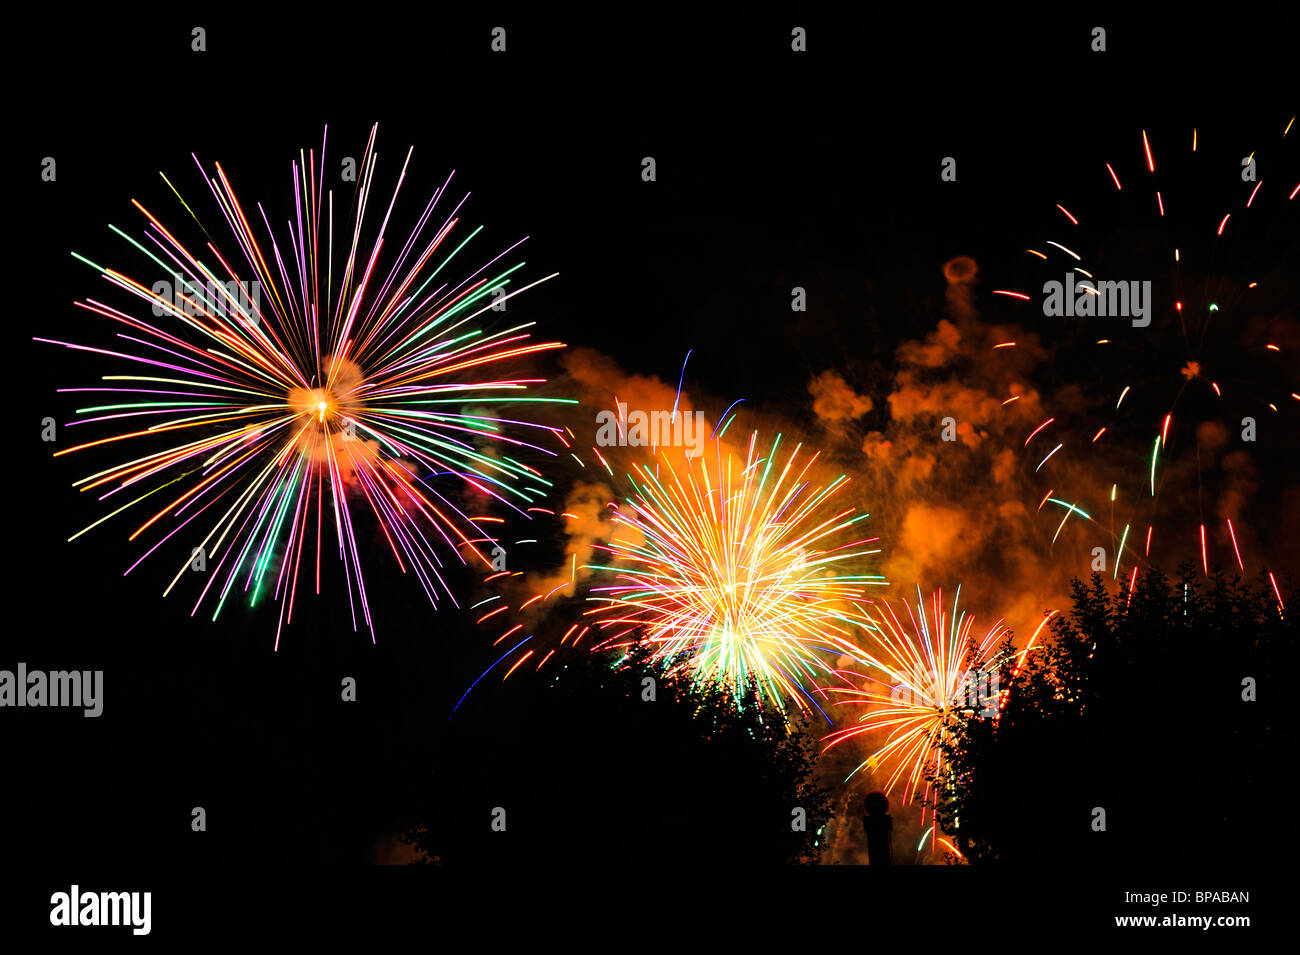 Firework bursts in the night sky, over trees (just visible). Space for text in the dark of the night sky. Stock Photo